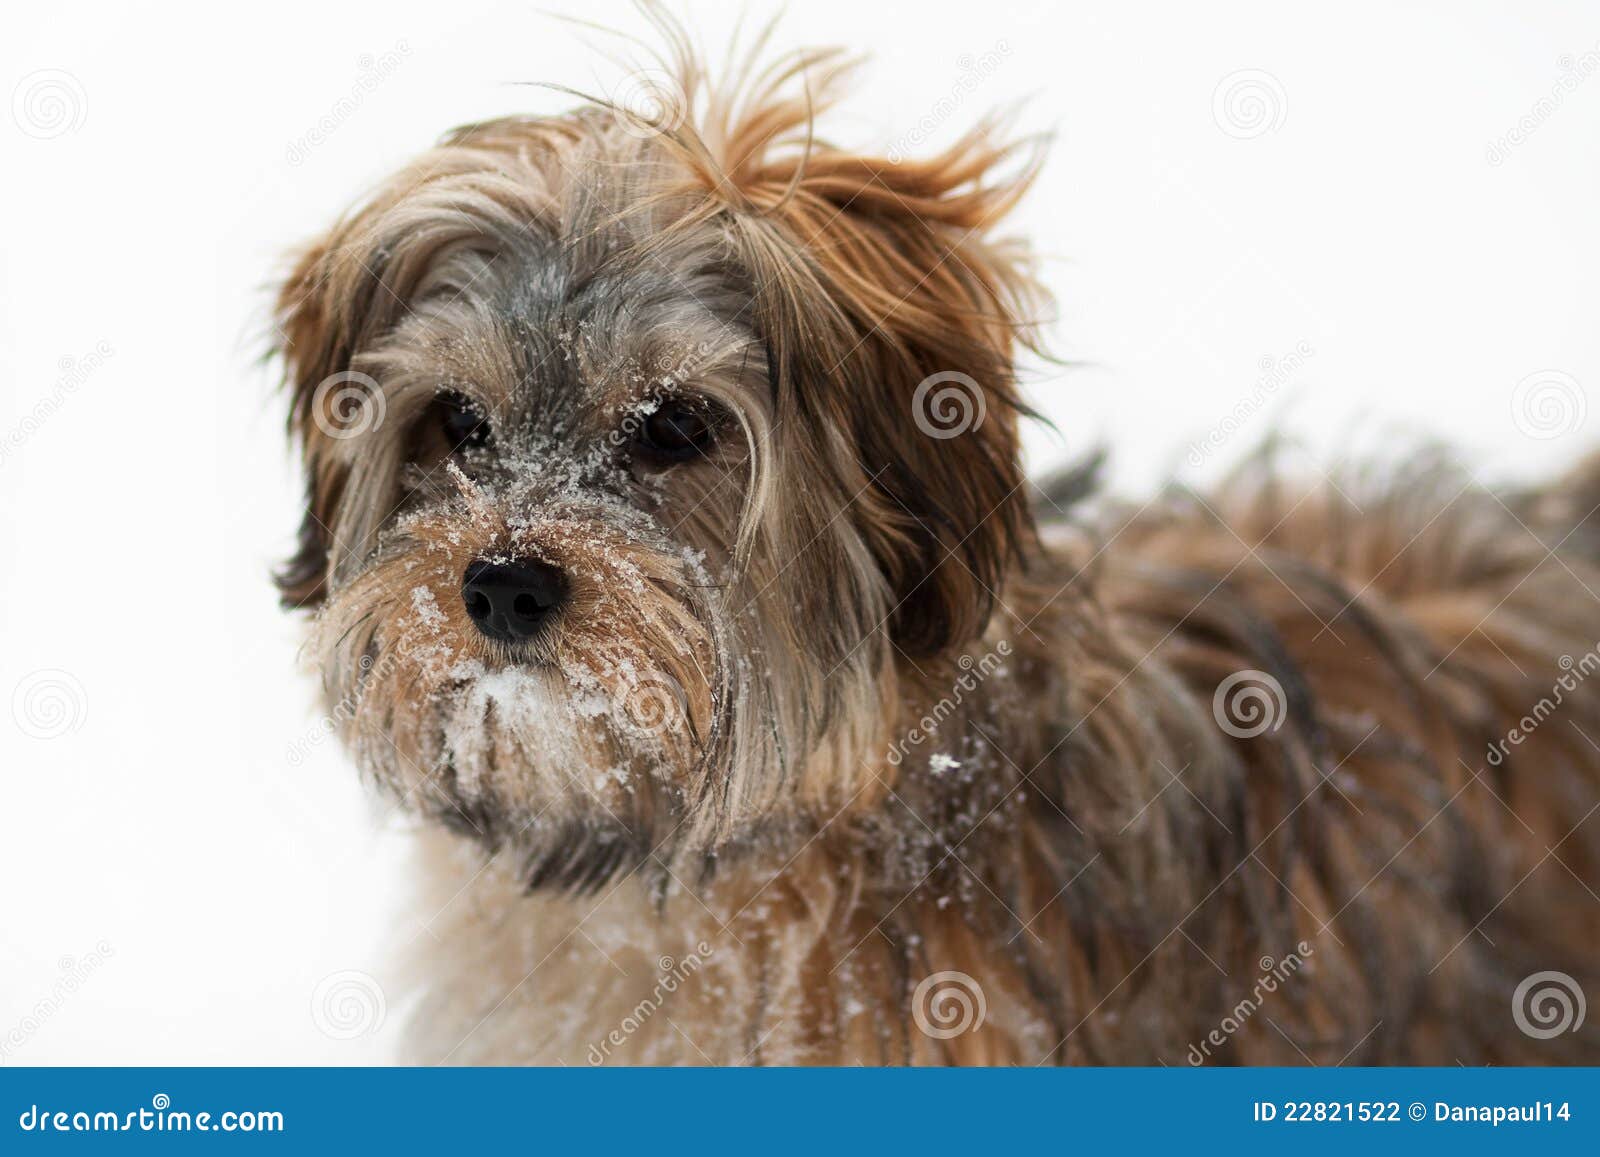 Cute Puppy in the Snow stock photo. Image of loyal, yorkie - 22821522